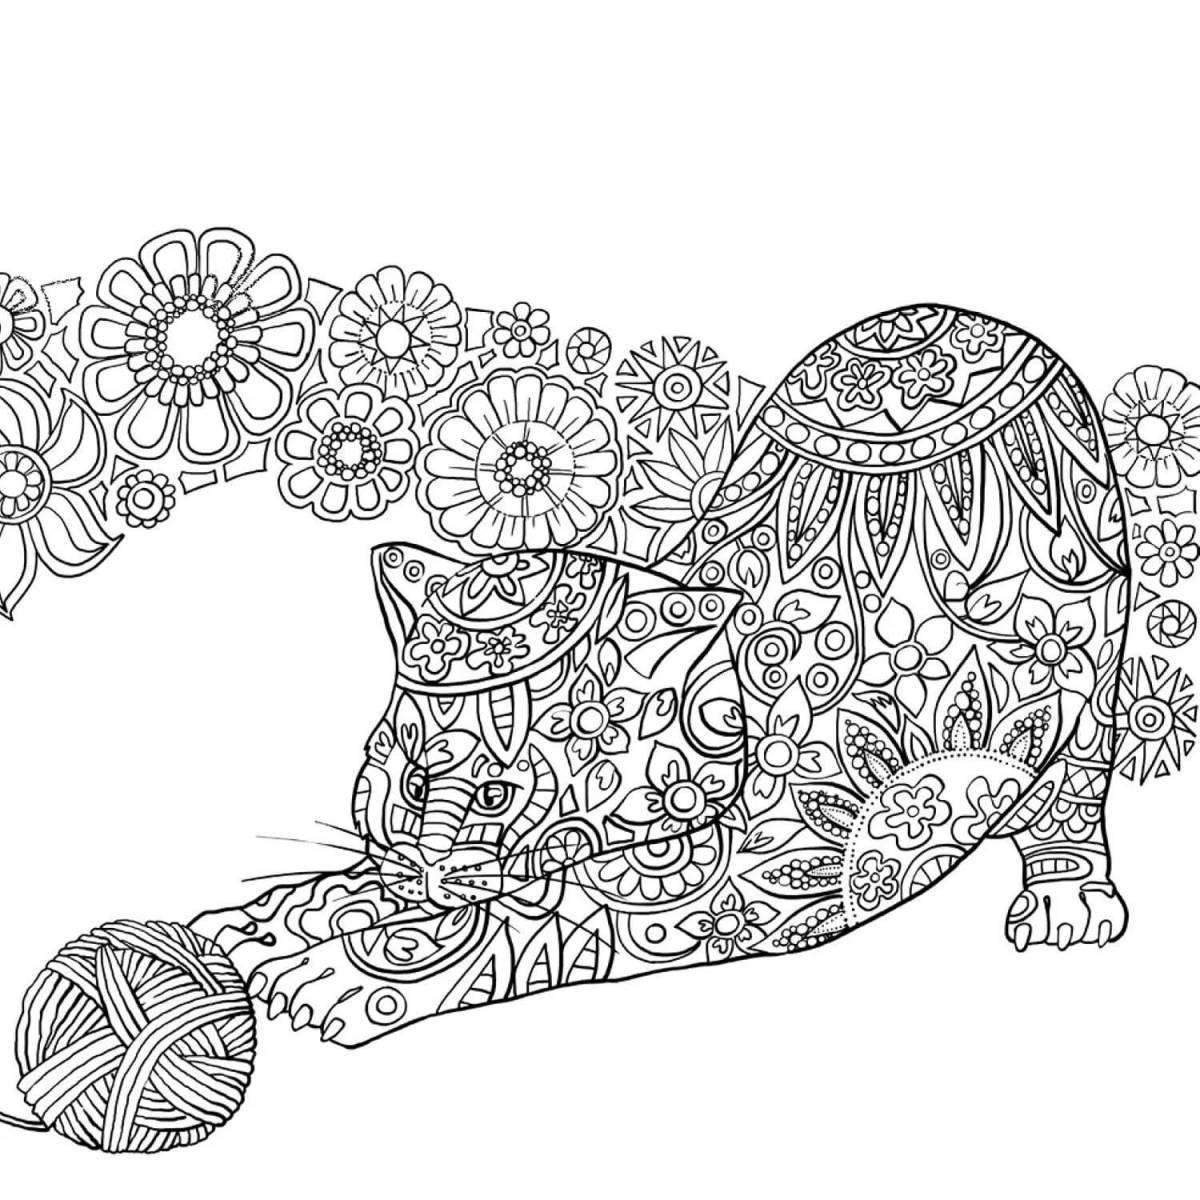 Radiant coloring page for girls 12 years old animals complex